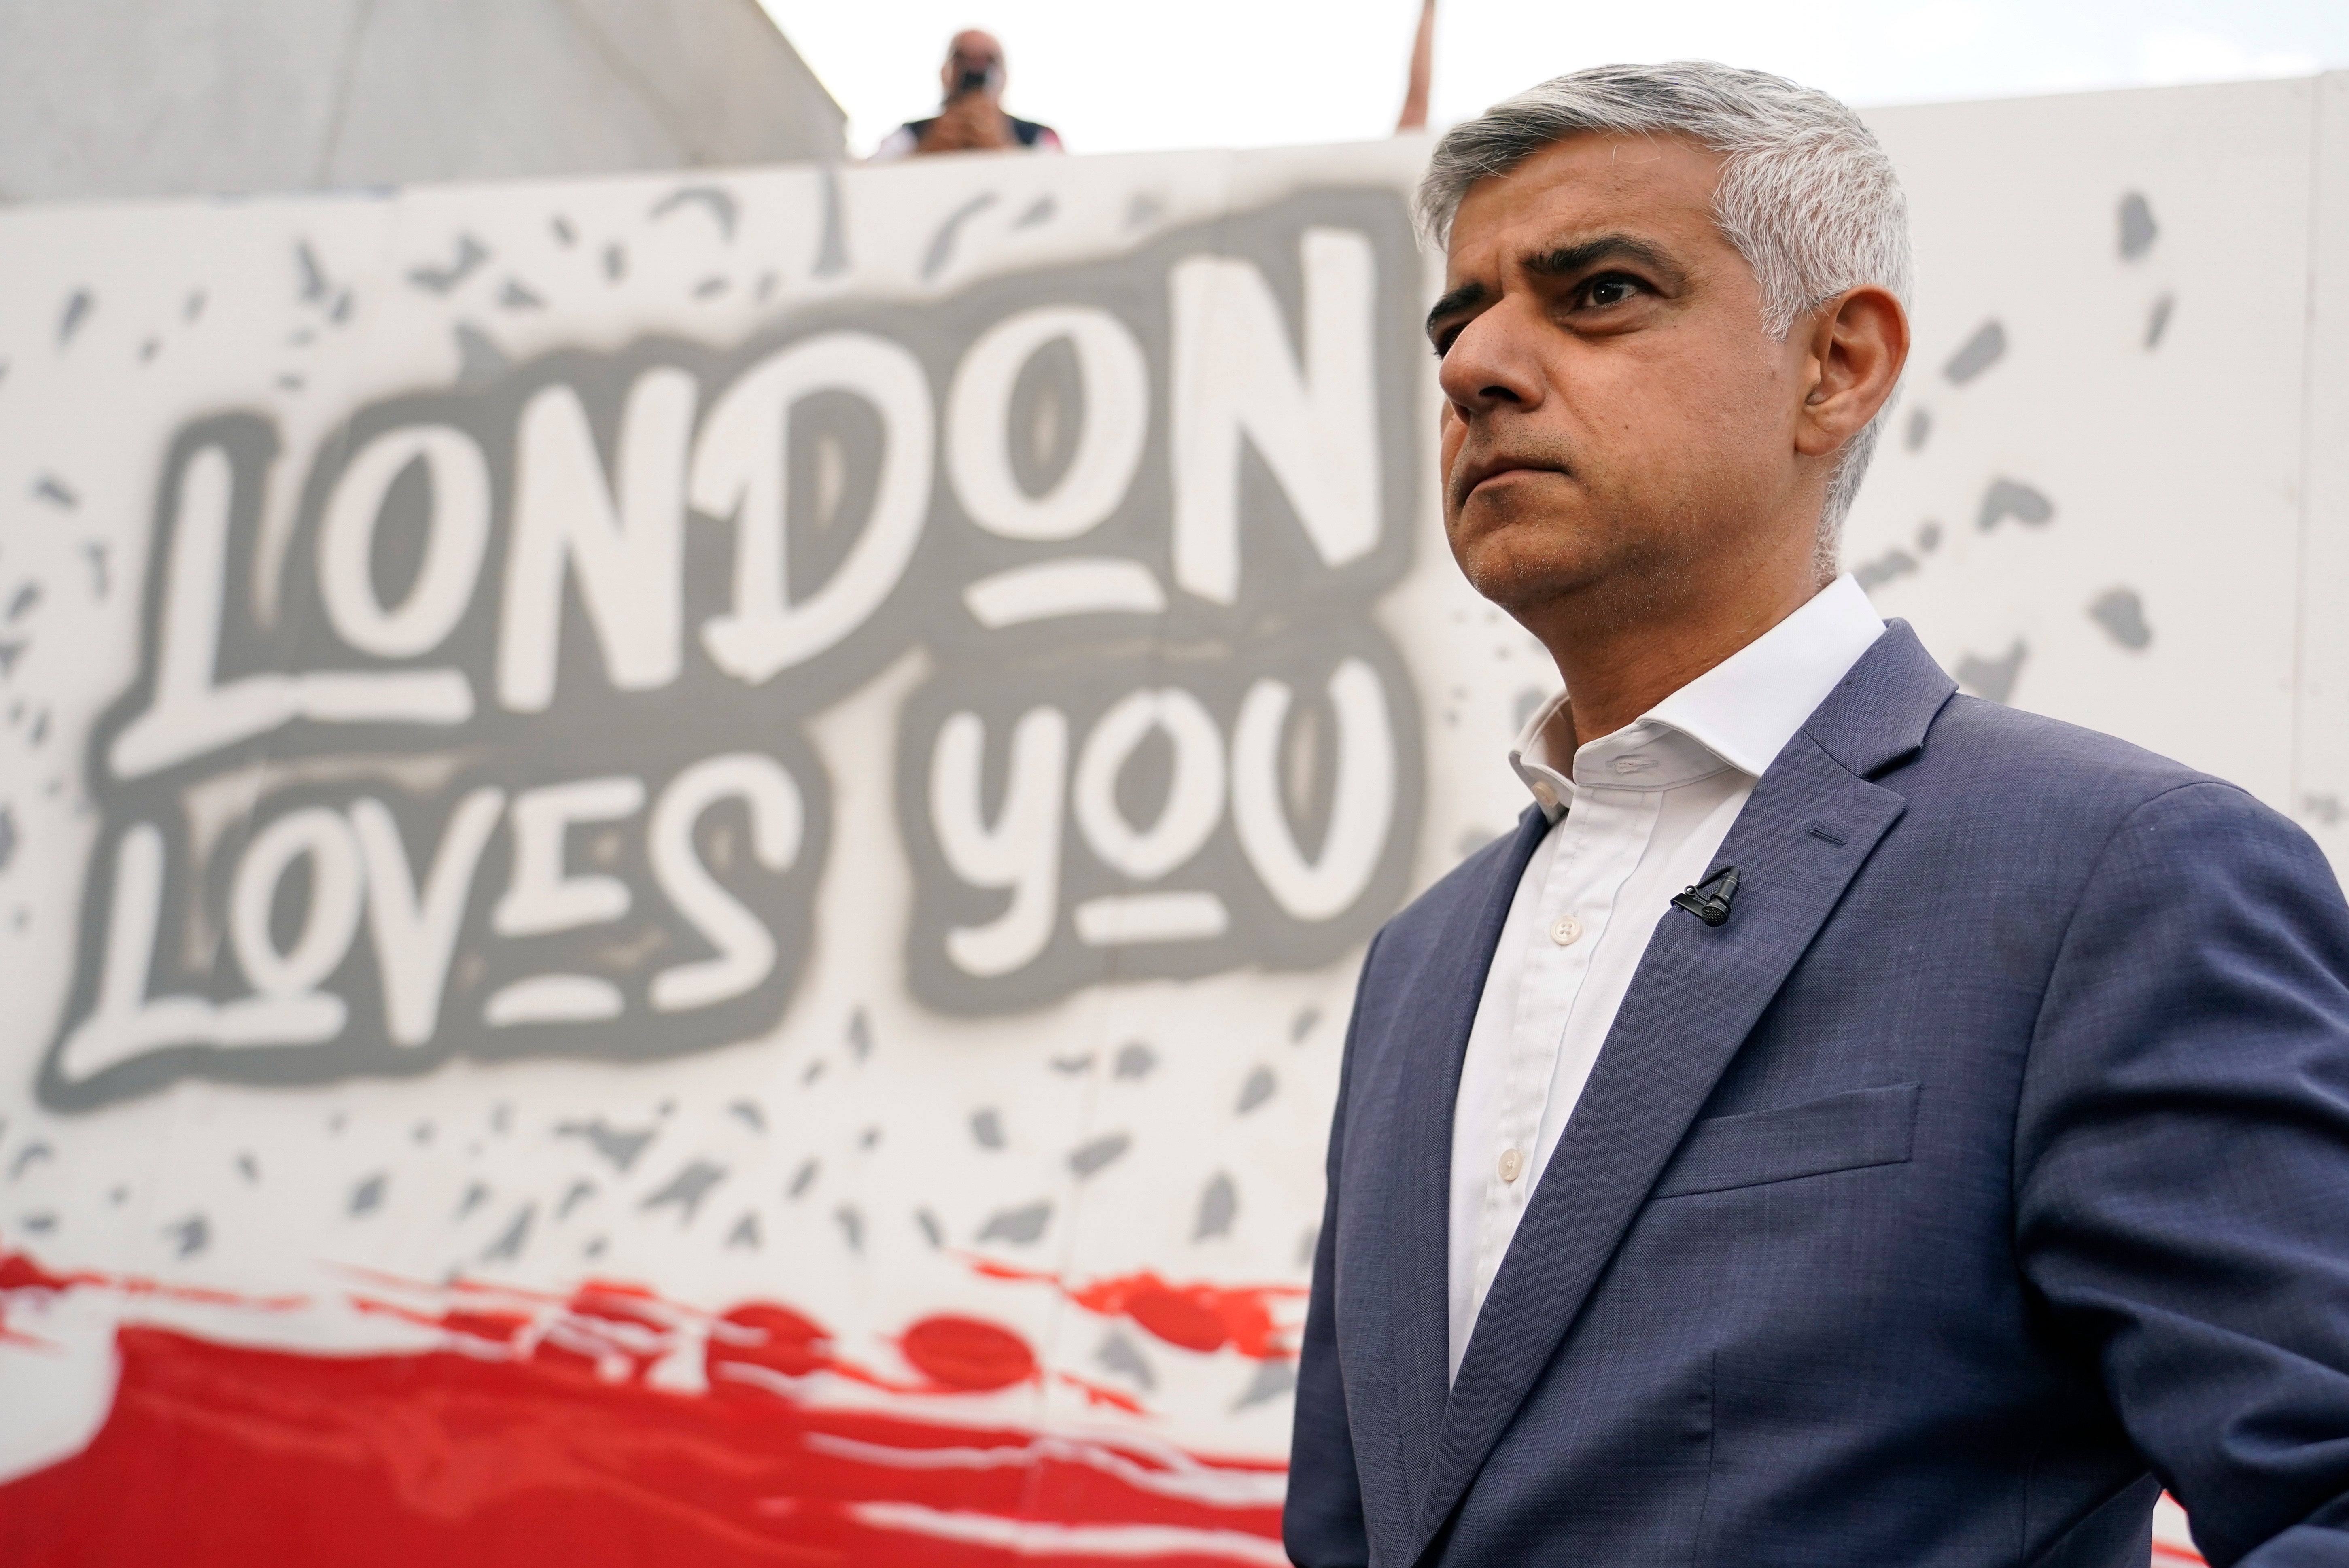 Khan condemned the ‘moral rot’ of anti-Muslim hatred in the Conservative Party